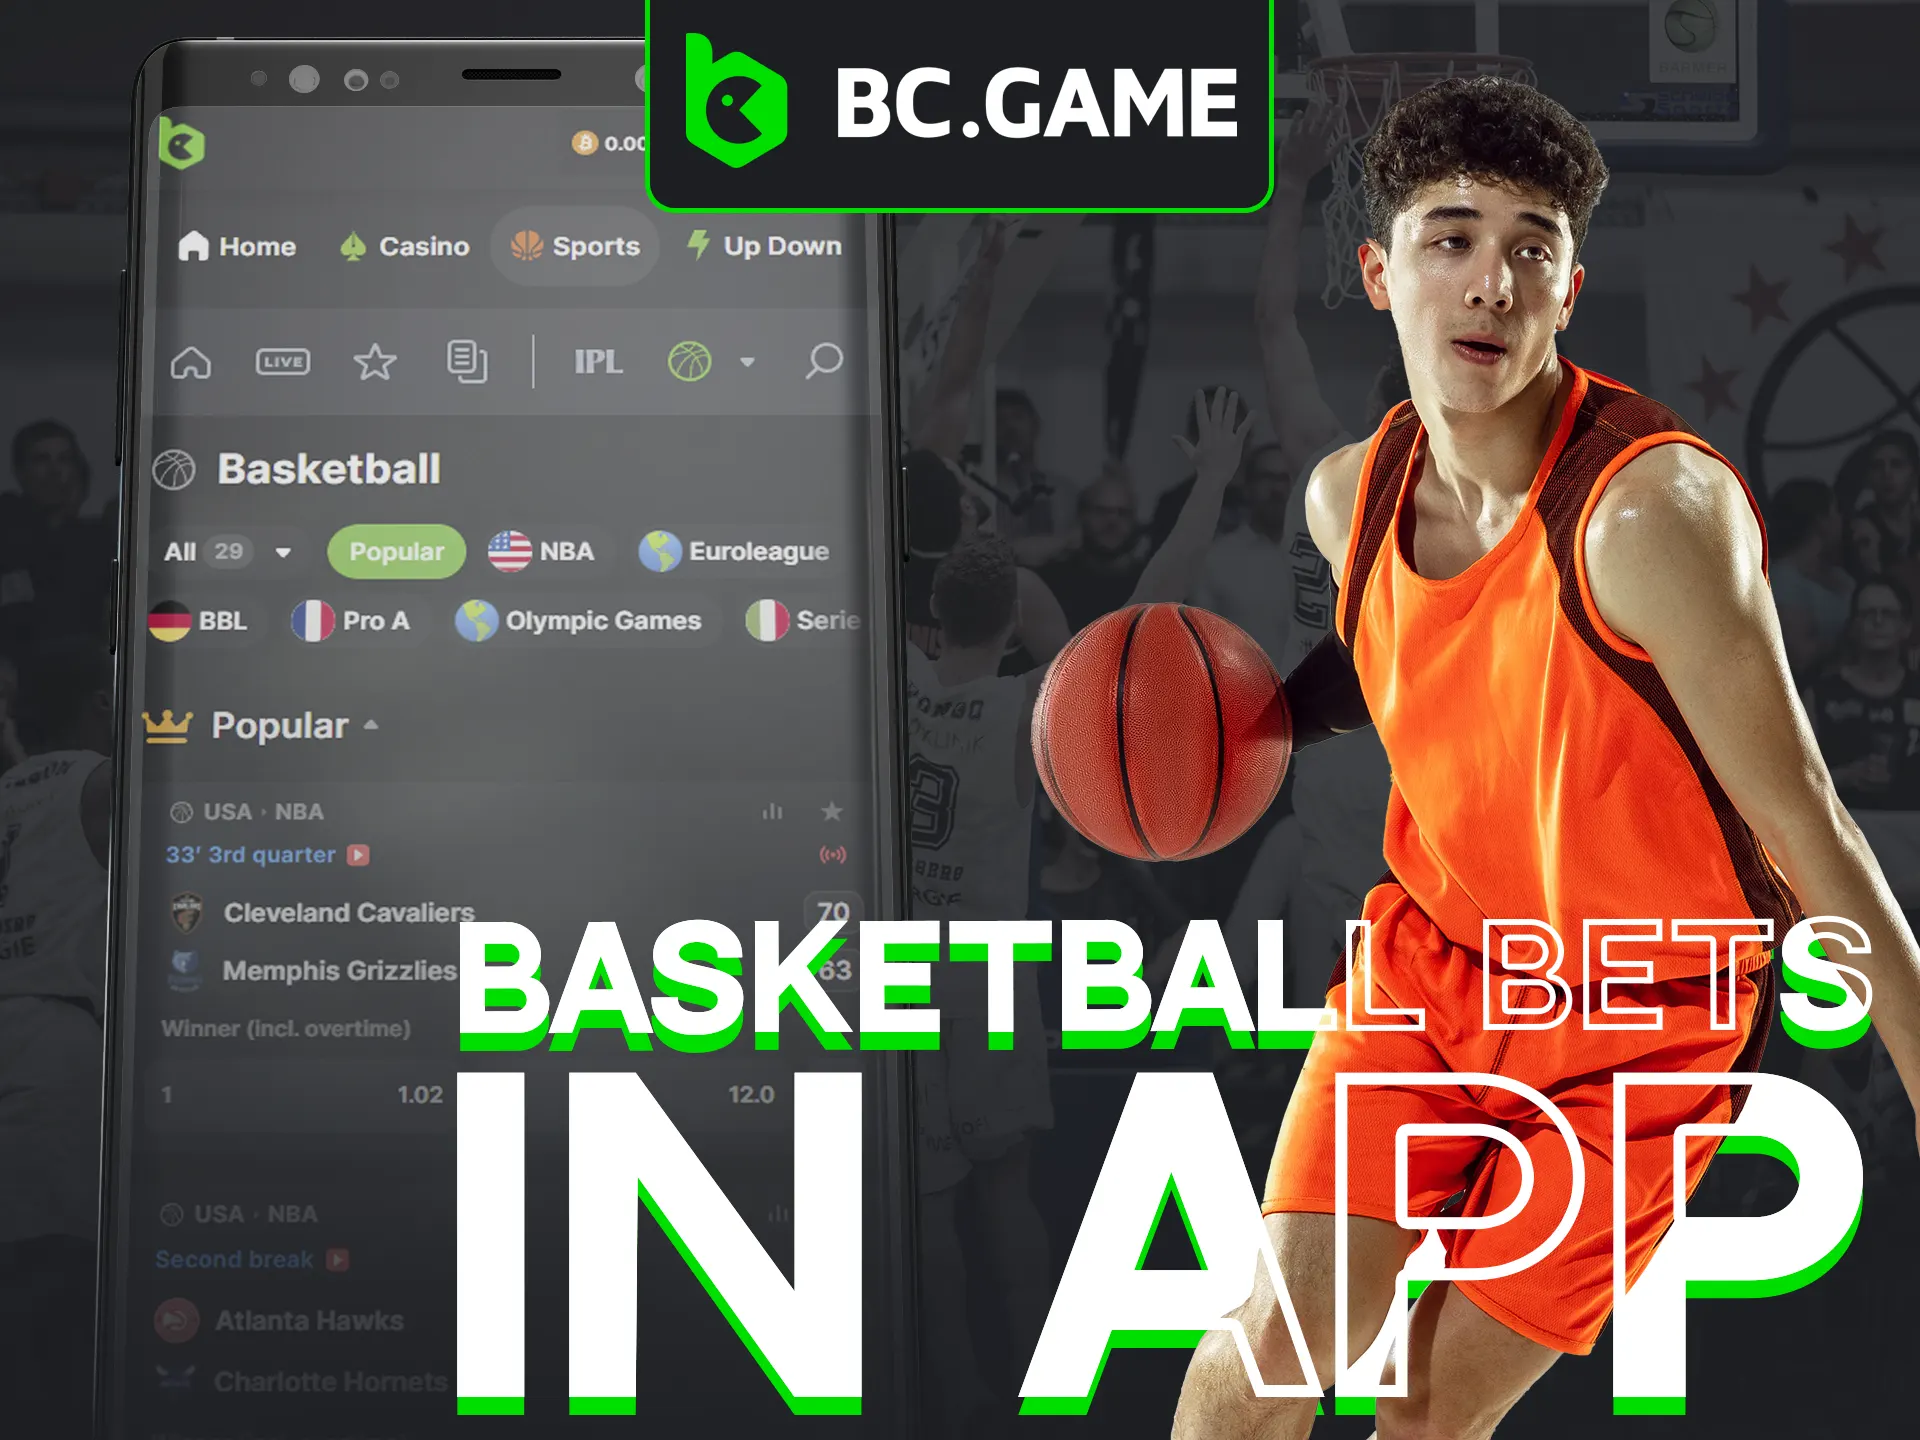 Bet on basketball easily with BC Game's mobile app.